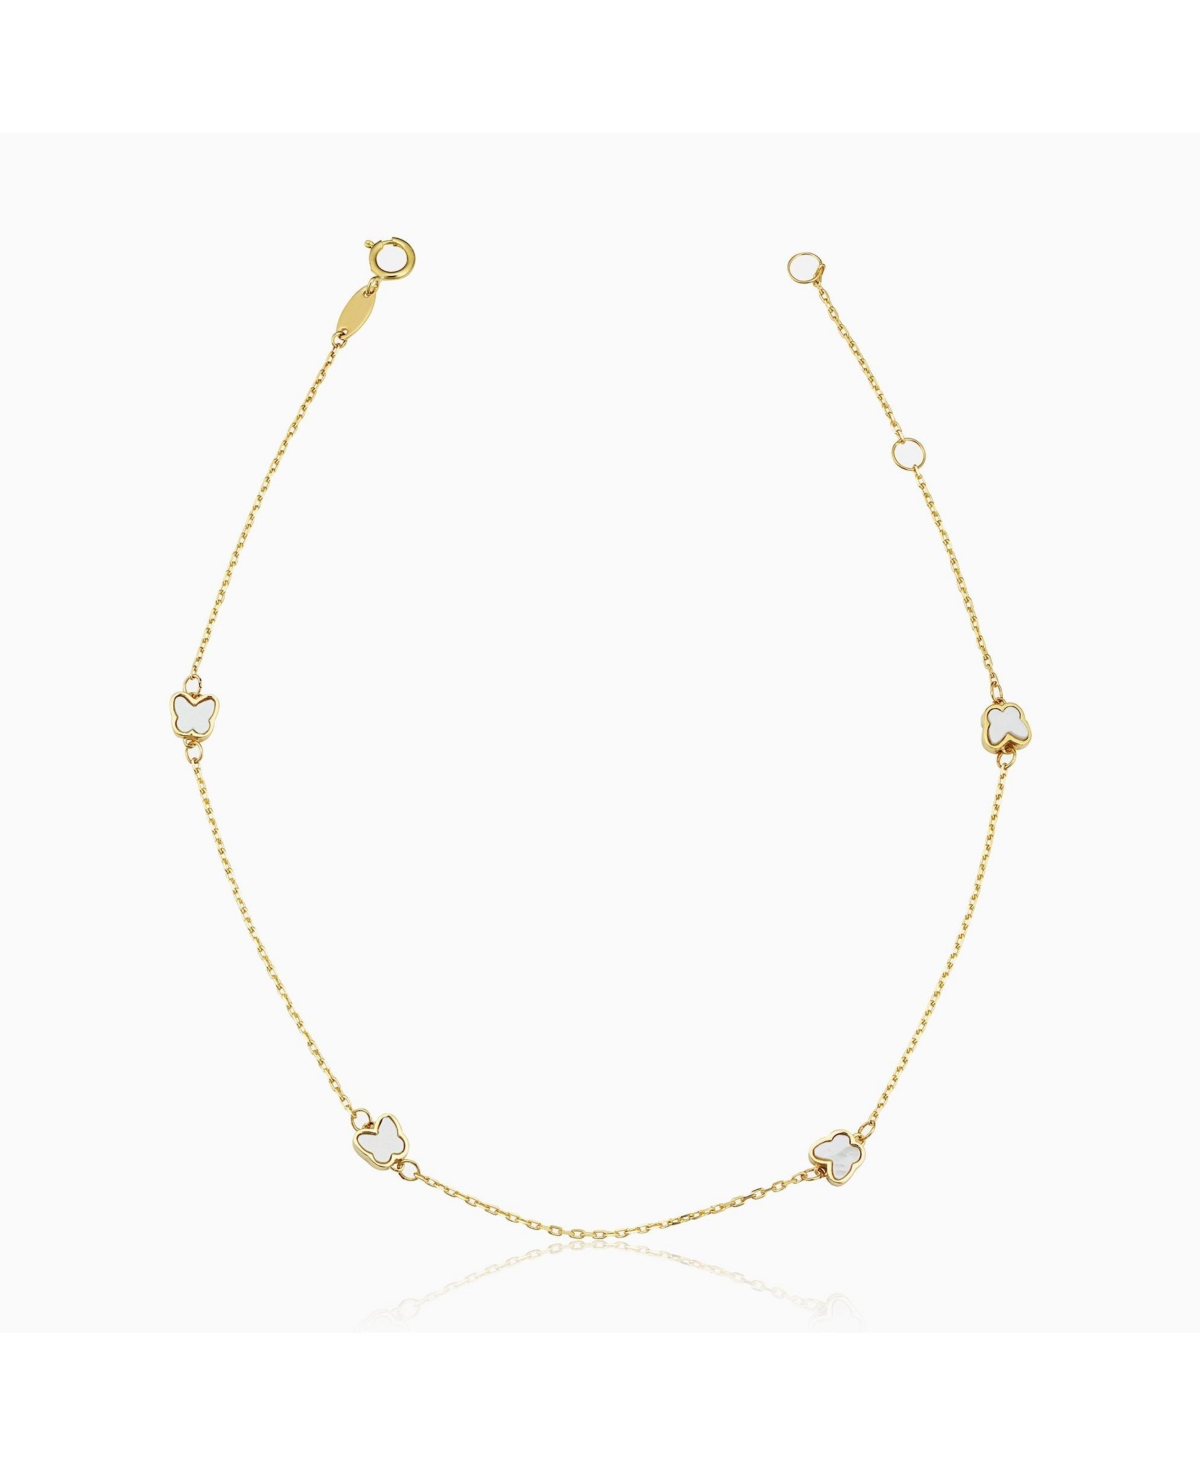 ORADINA FLUTTER BY ANKLET IN 14K YELLOW GOLD